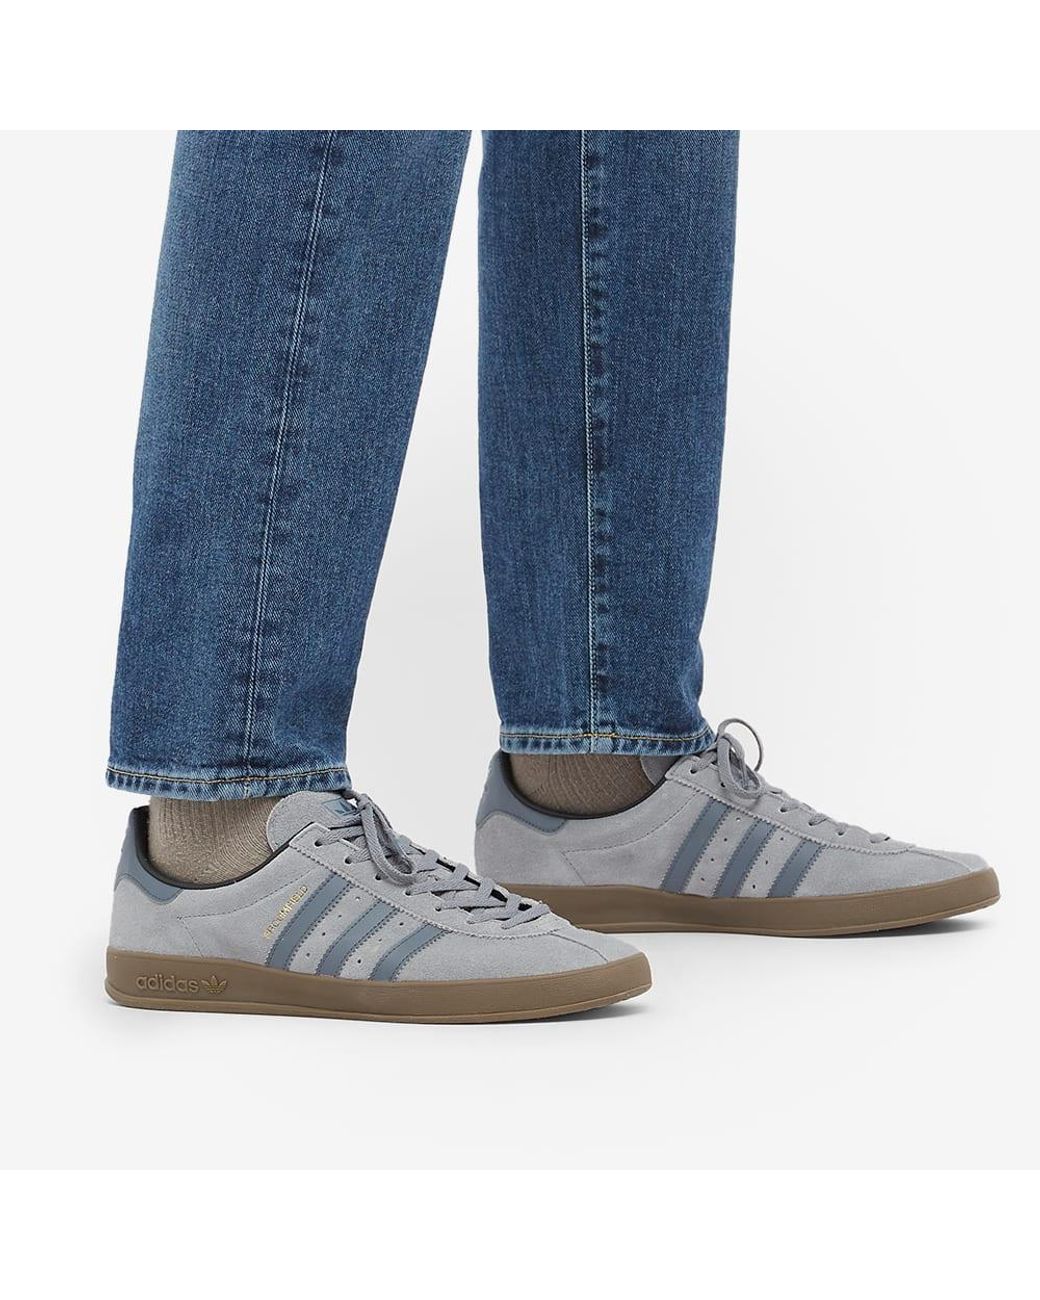 adidas Grey Black Shoes in Gray for Lyst